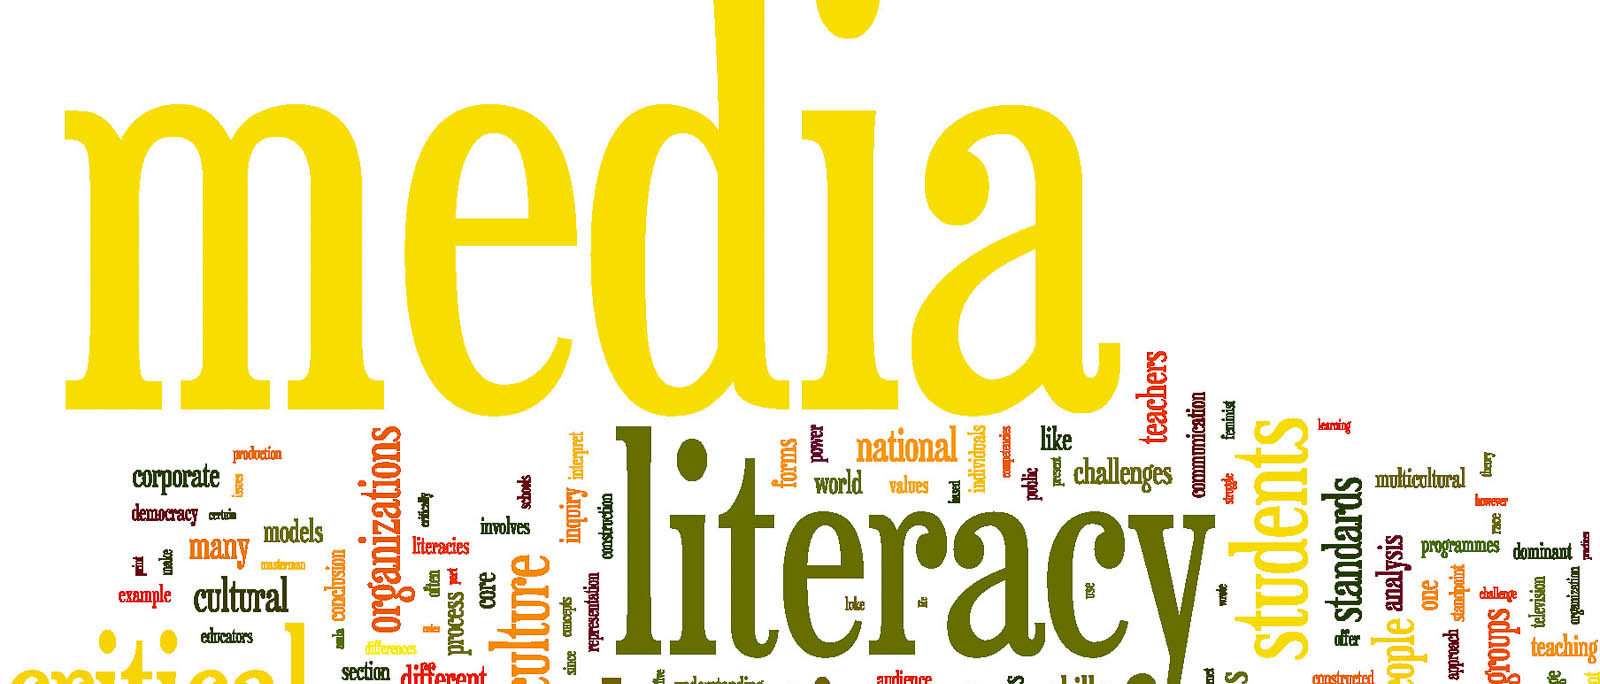 essay about media and information literacy 500 words brainly